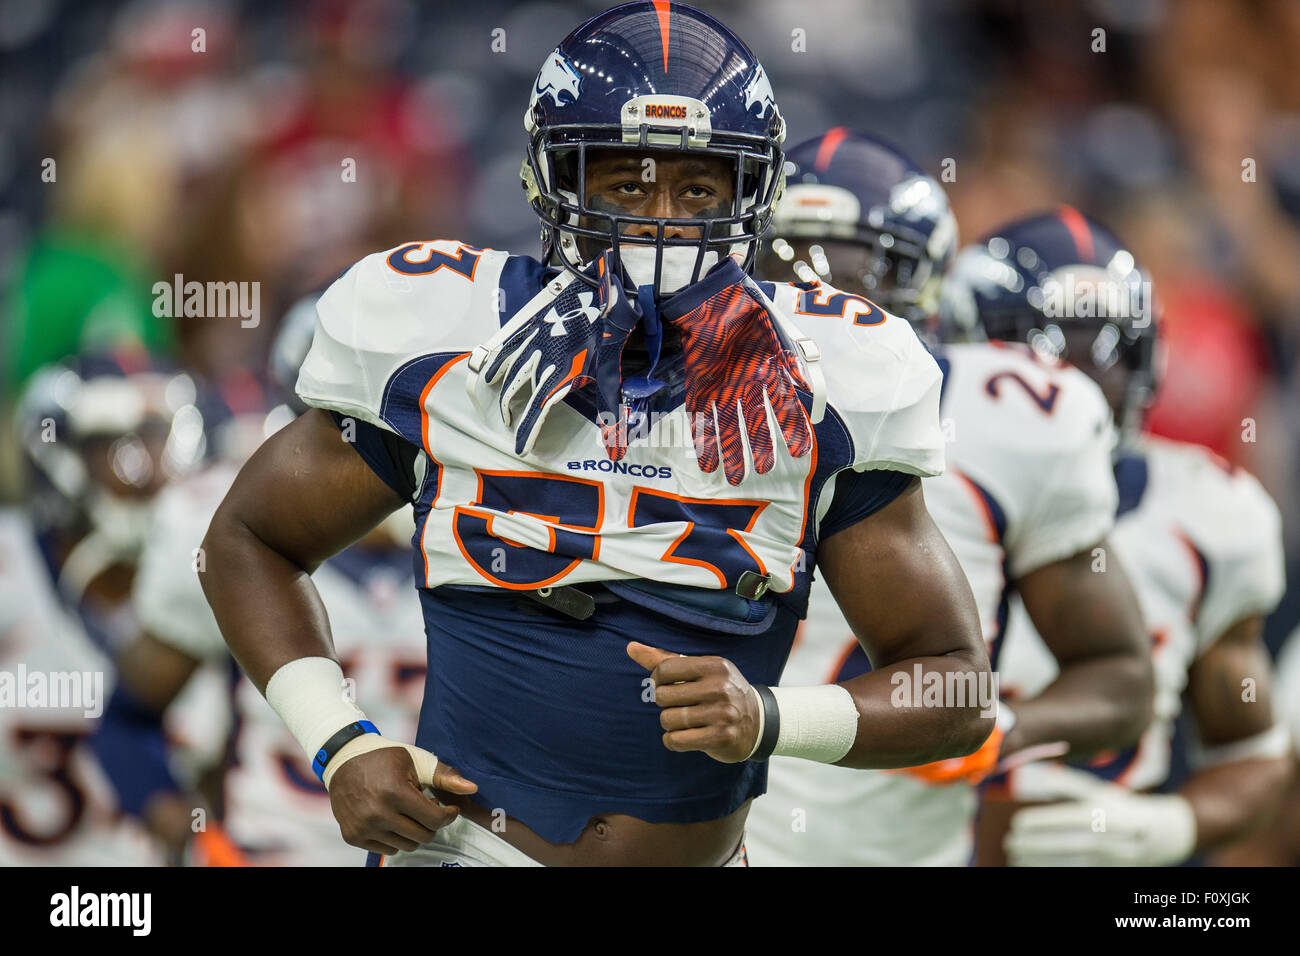 Houston, Texas, USA. 22nd Aug, 2015. Denver Broncos middle linebacker Steven Johnson (53) enters the field prior to an NFL preseason game between the Houston Texans and the Denver Broncos at NRG Stadium in Houston, TX on August 22nd, 2015. Credit:  Trask Smith/ZUMA Wire/Alamy Live News Stock Photo